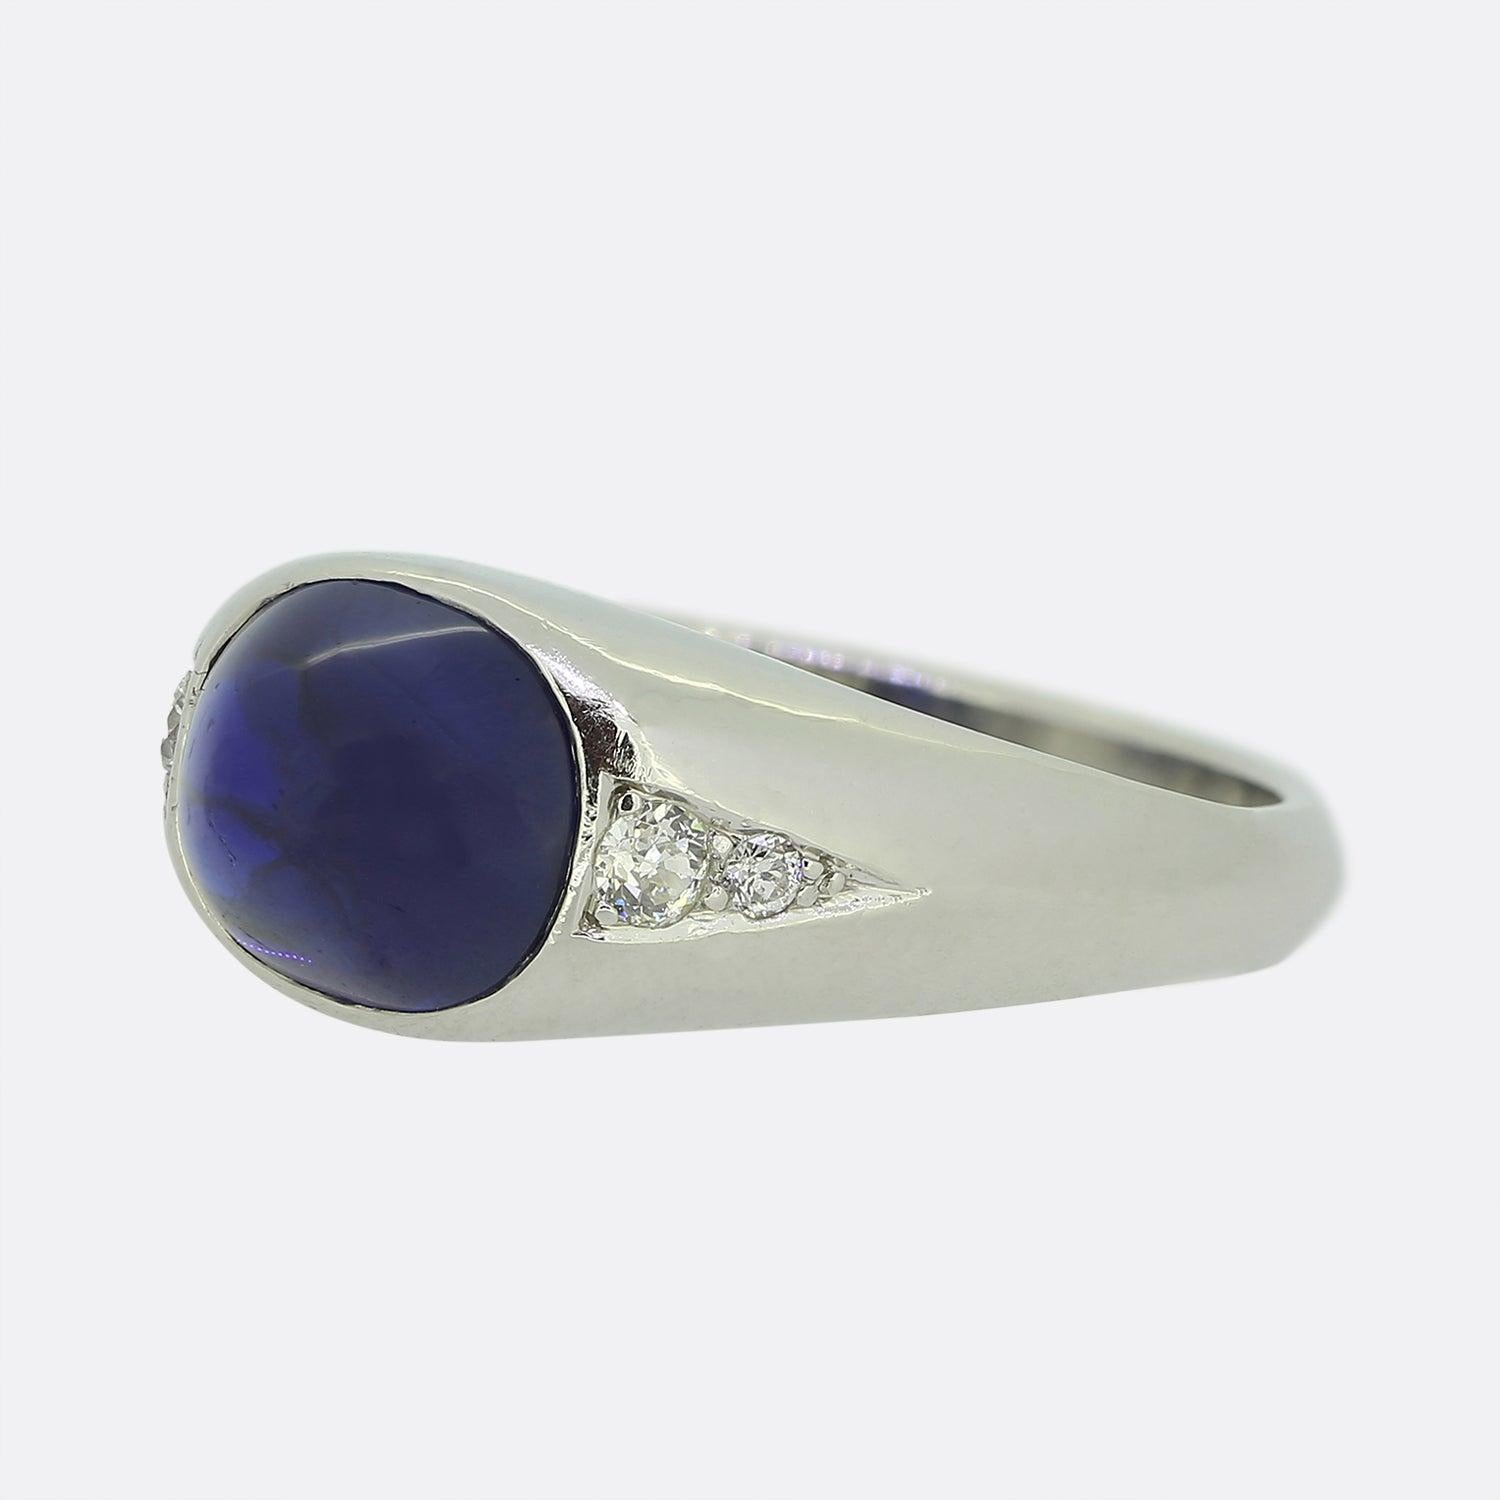 Here we have a fabulous sapphire and diamond ring. A remarkable natural sugarloaf cabochon sapphire possessing a rich royal blue colour tone sits at the centre the centre of the face and is flanked on either shoulder by a duo of round faceted old